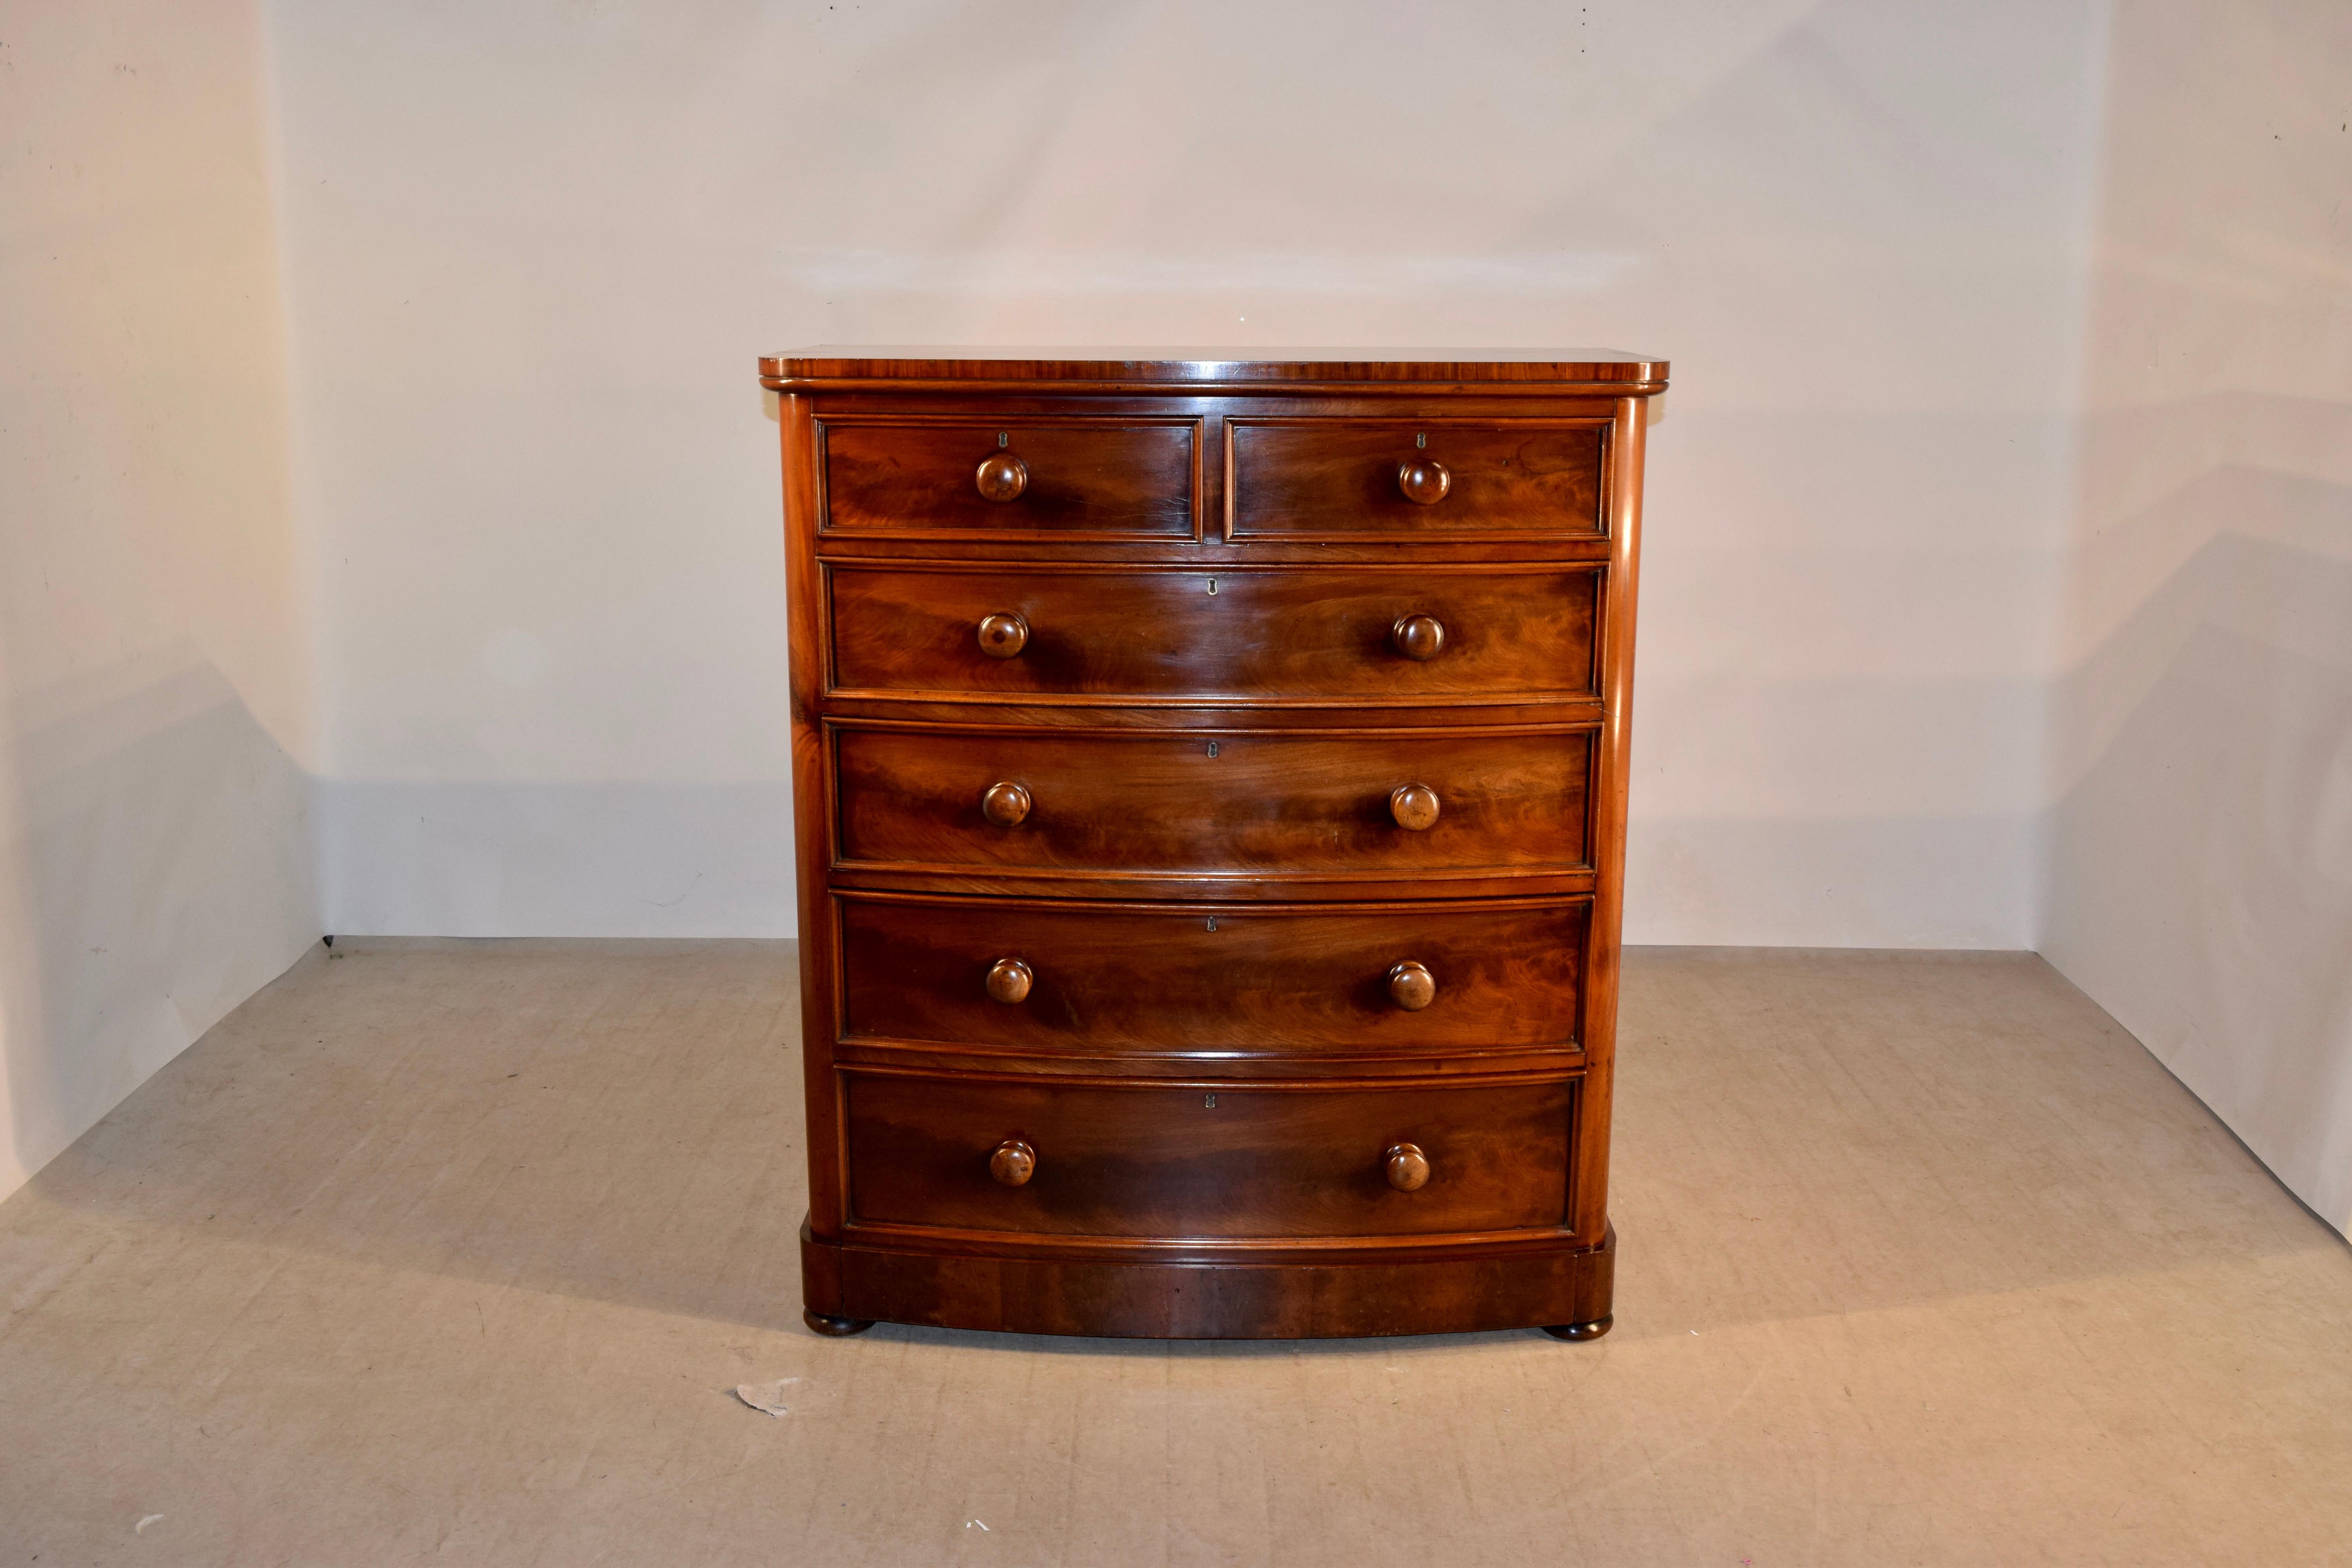 19th century mahogany bow front chest of drawers from England. The top is beautifully figured and follows down to simple sides and two drawers over four drawers. The bottom drawer is very deep and continues all the way to the bottom of the case